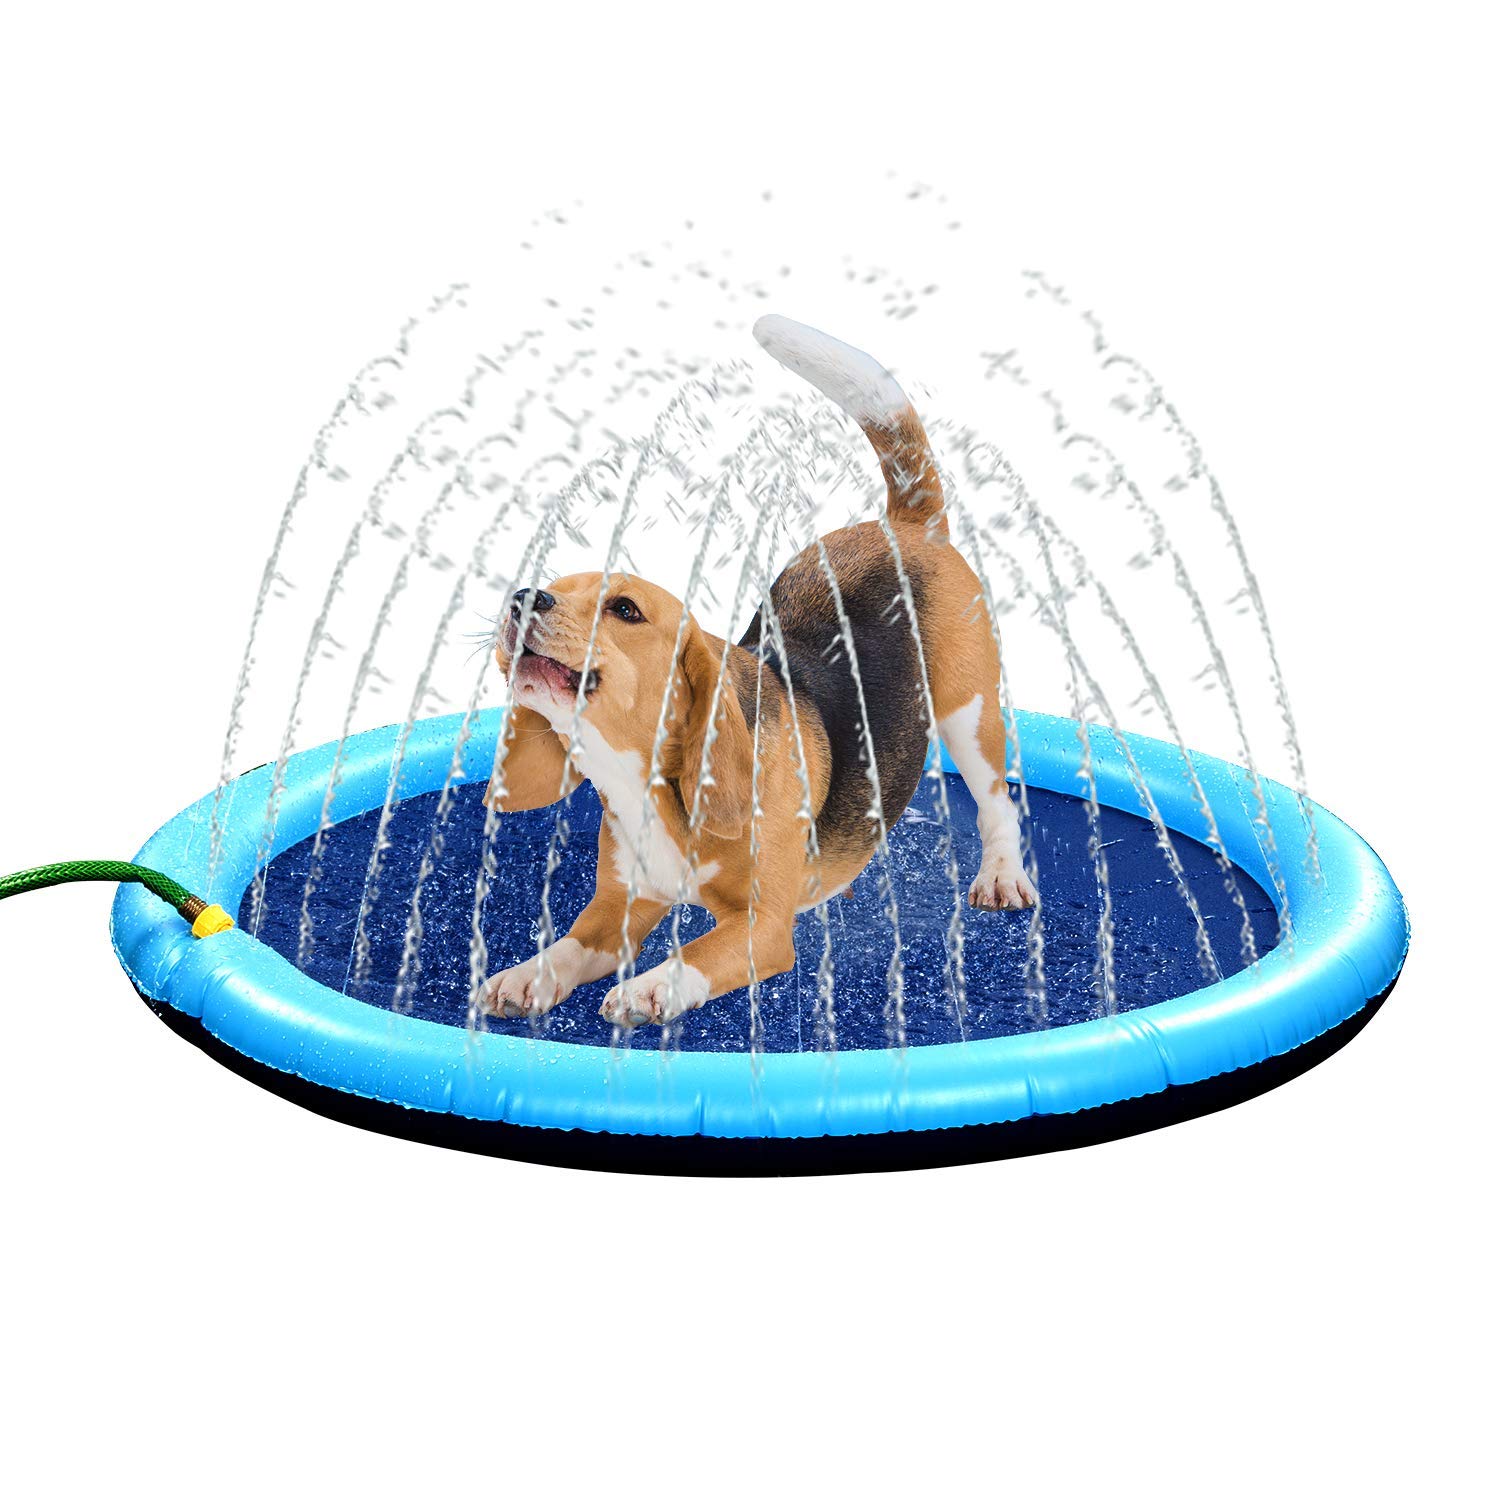 Bundaloo Dog Sprinkler Pool - Outdoor Water Splash Mat & Bathing Fountain for Pets - Thick PVC Material, Non-Slip Bottom, Connects to Standard Garden Hoses - Summer, Lawn & Yard Toy - 51� Diameter  - Like New